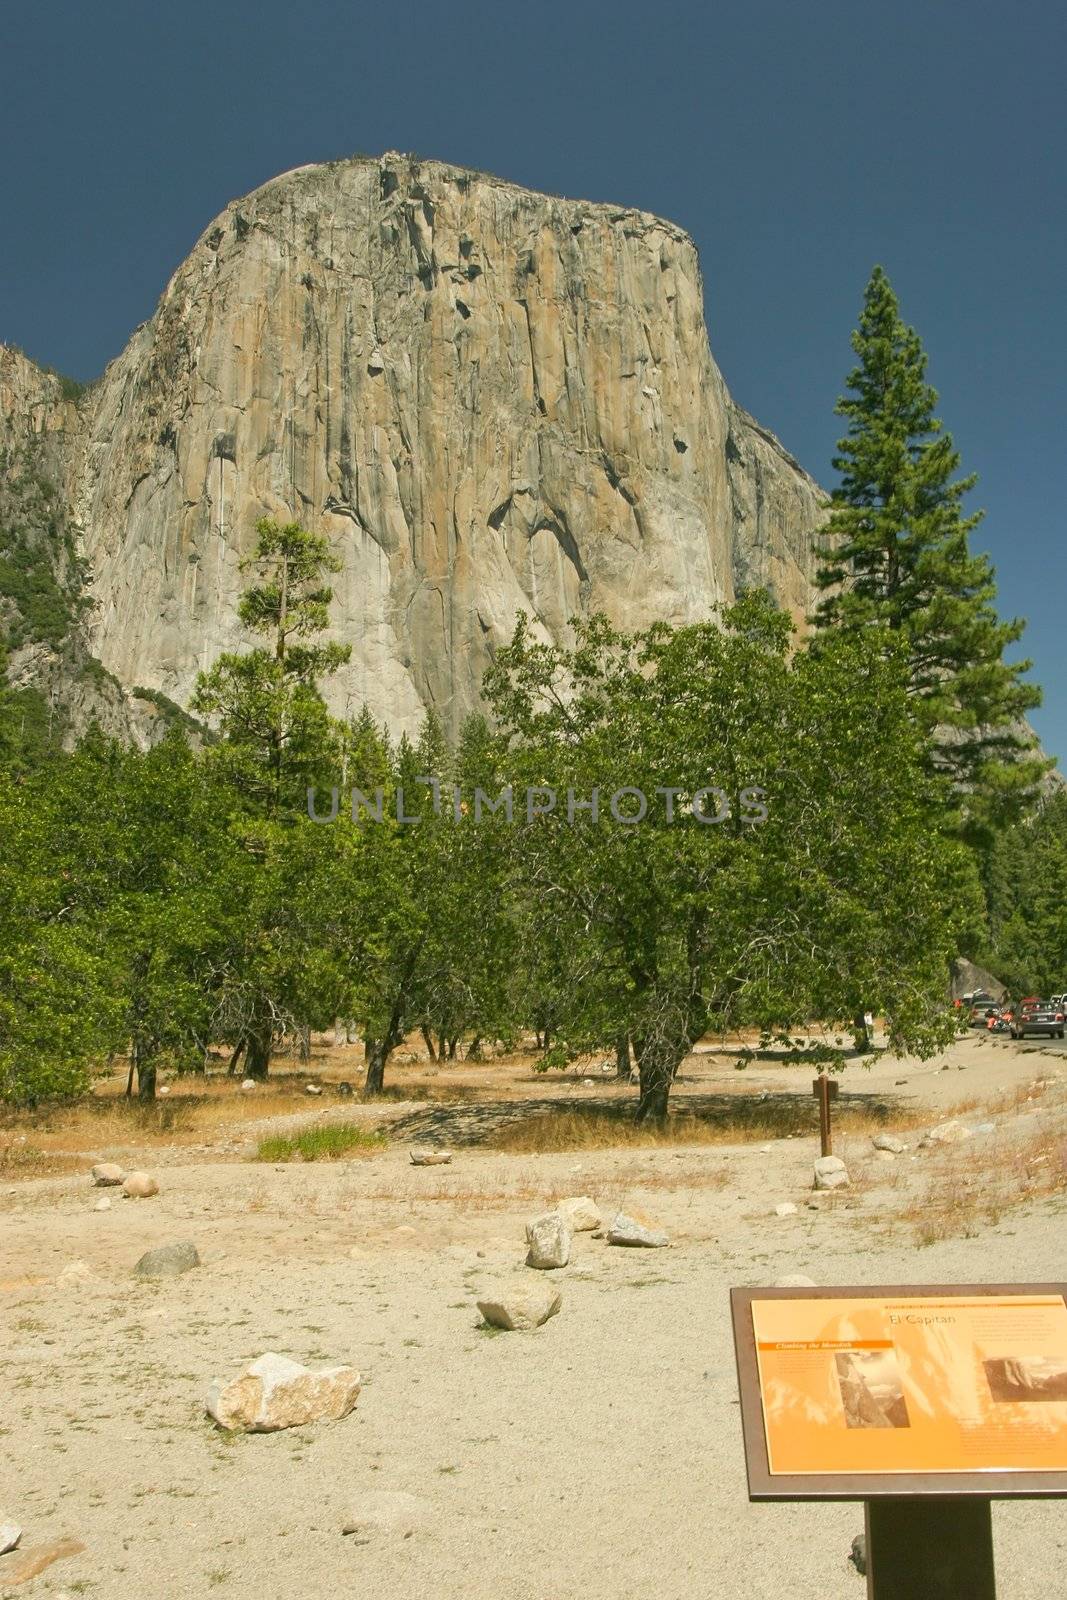 El Capitan is a 3,000 feet (910 m) vertical rock formation in Yosemite National Park